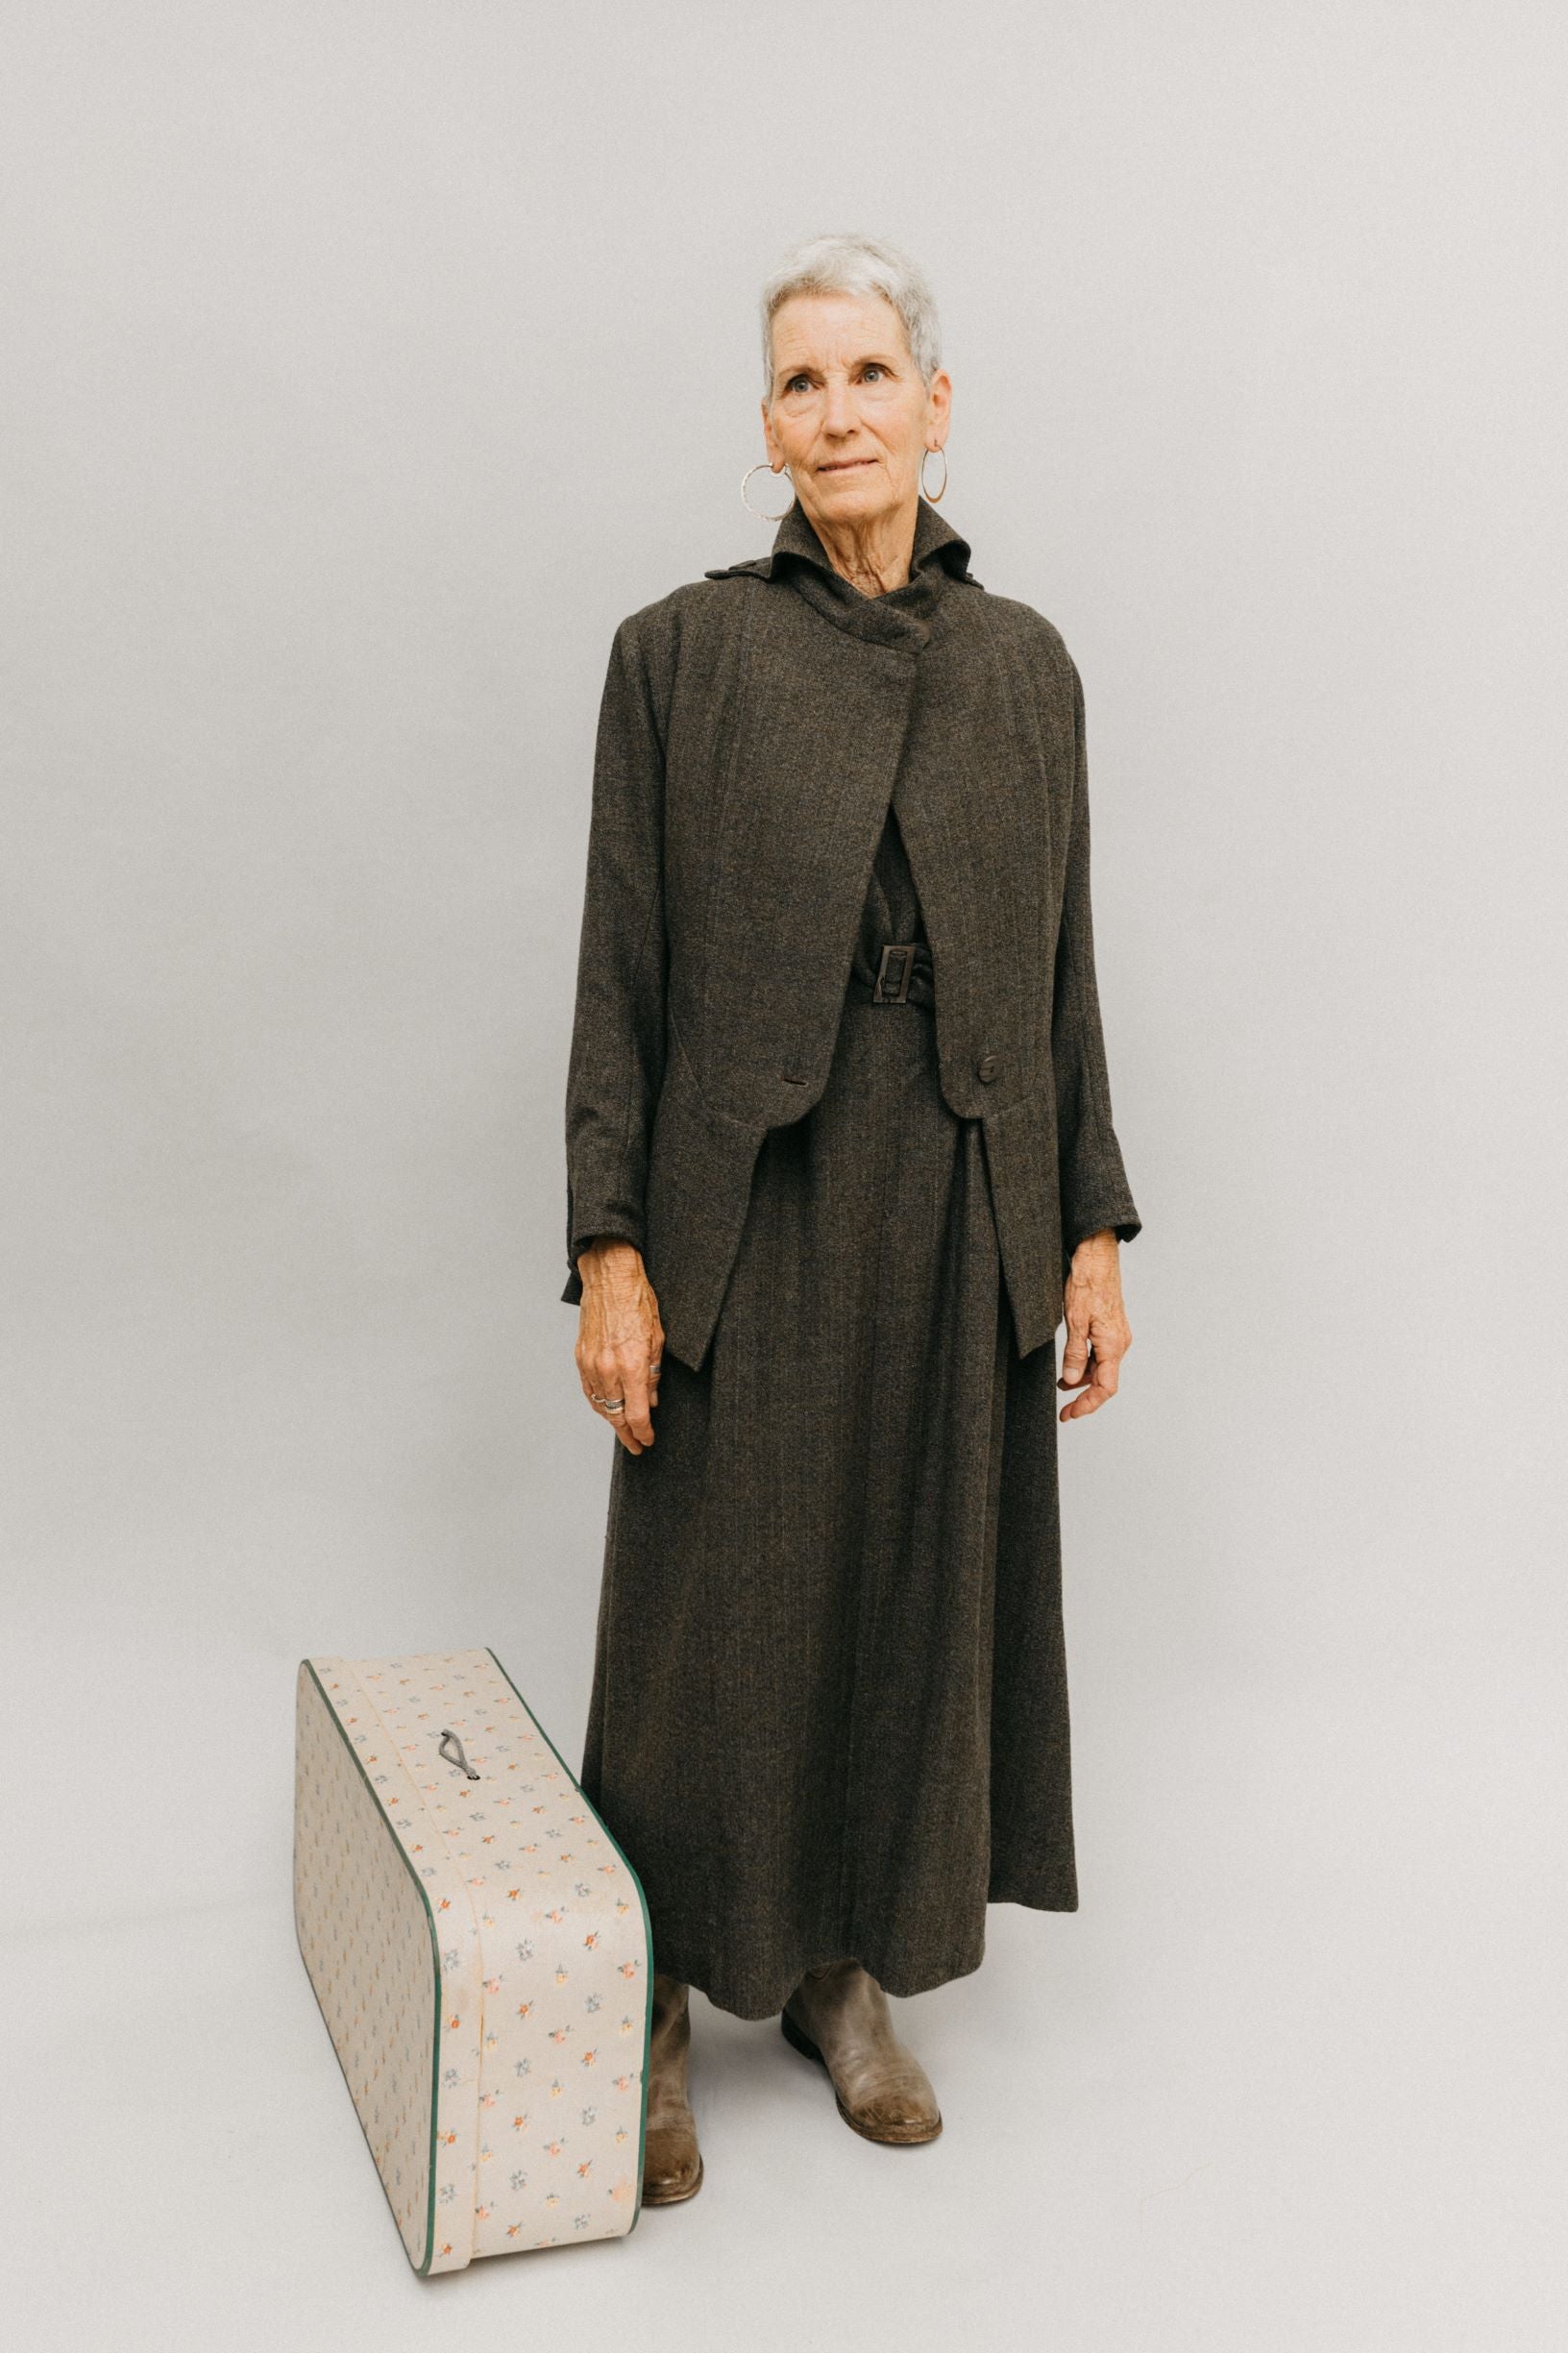 Older white woman, with gray hair wearing the 508 traveling suit, she is standing next to a white suitcase in front of a studio white backdrop